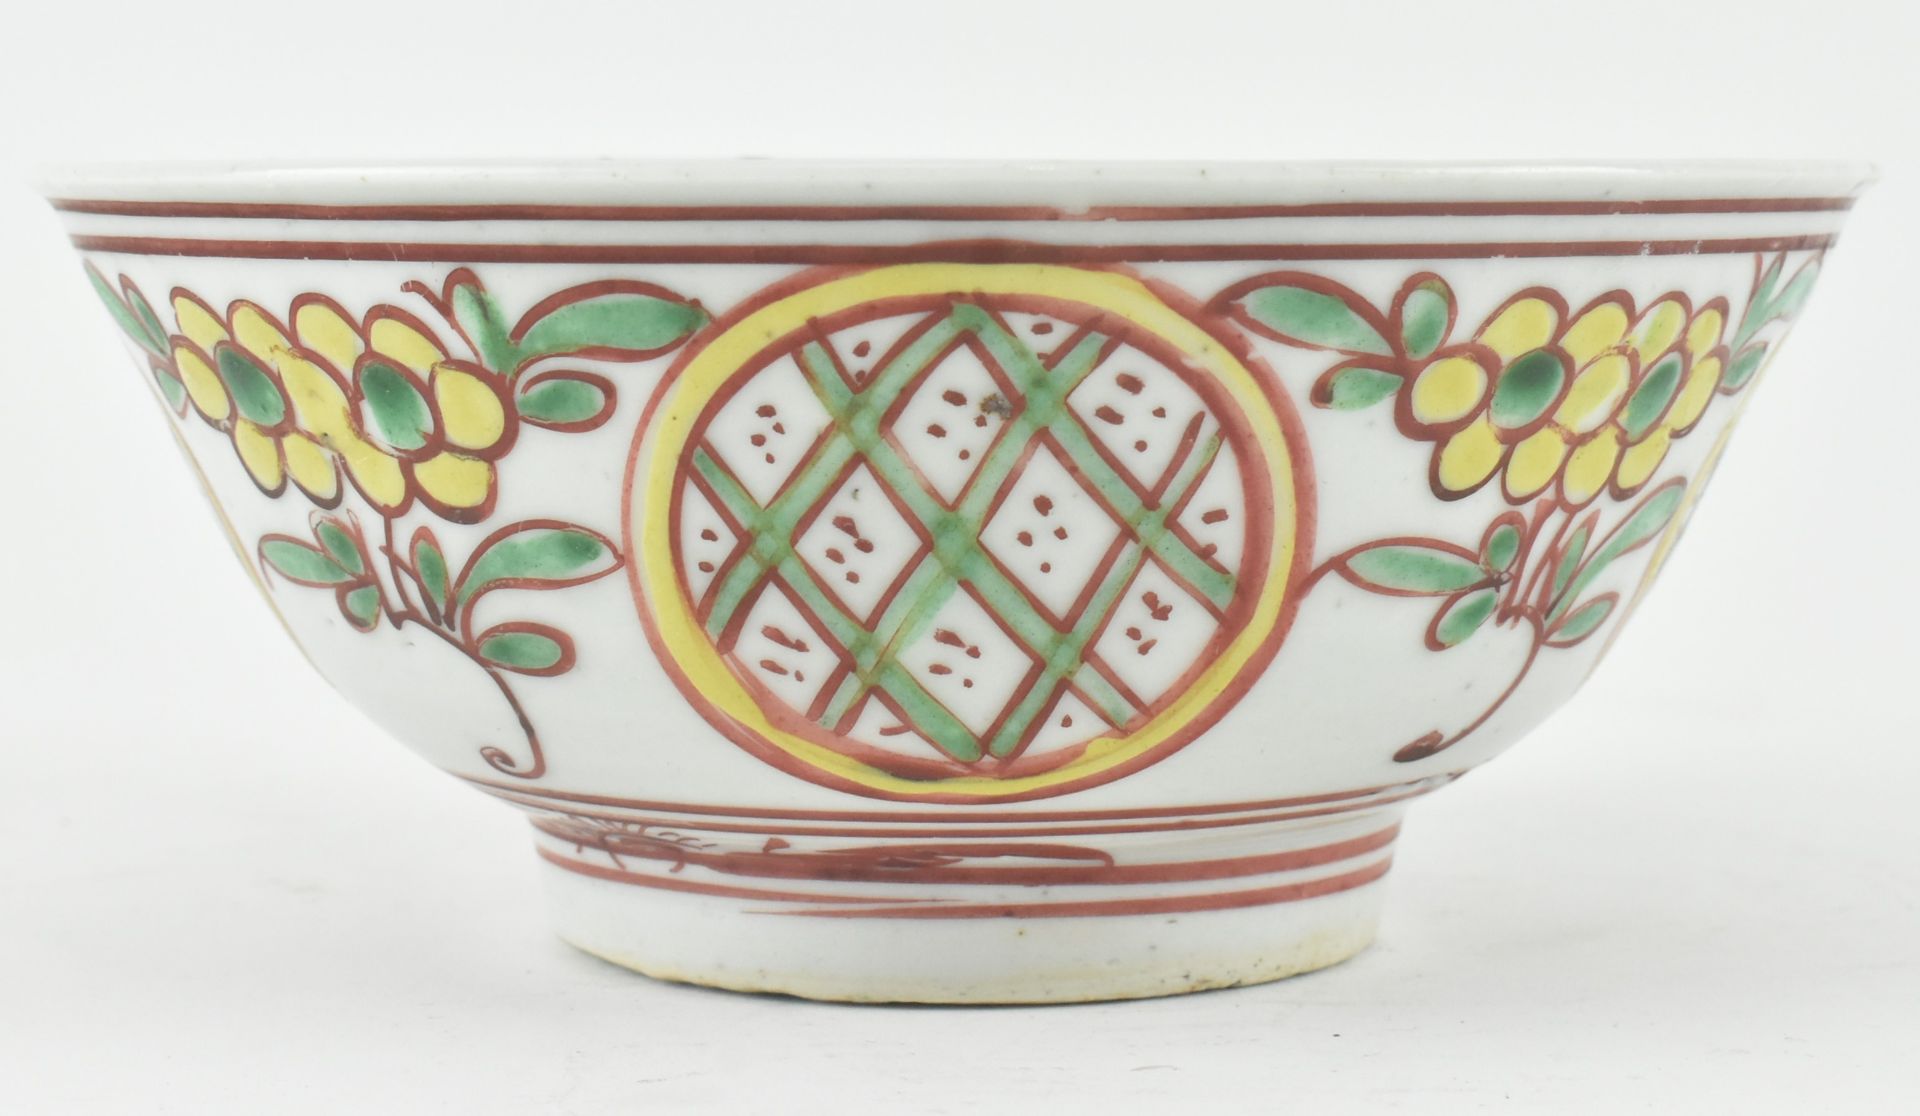 MING OR LATER TRI-COLOURED BOWL 明 红黄绿彩绘碗 - Image 3 of 6